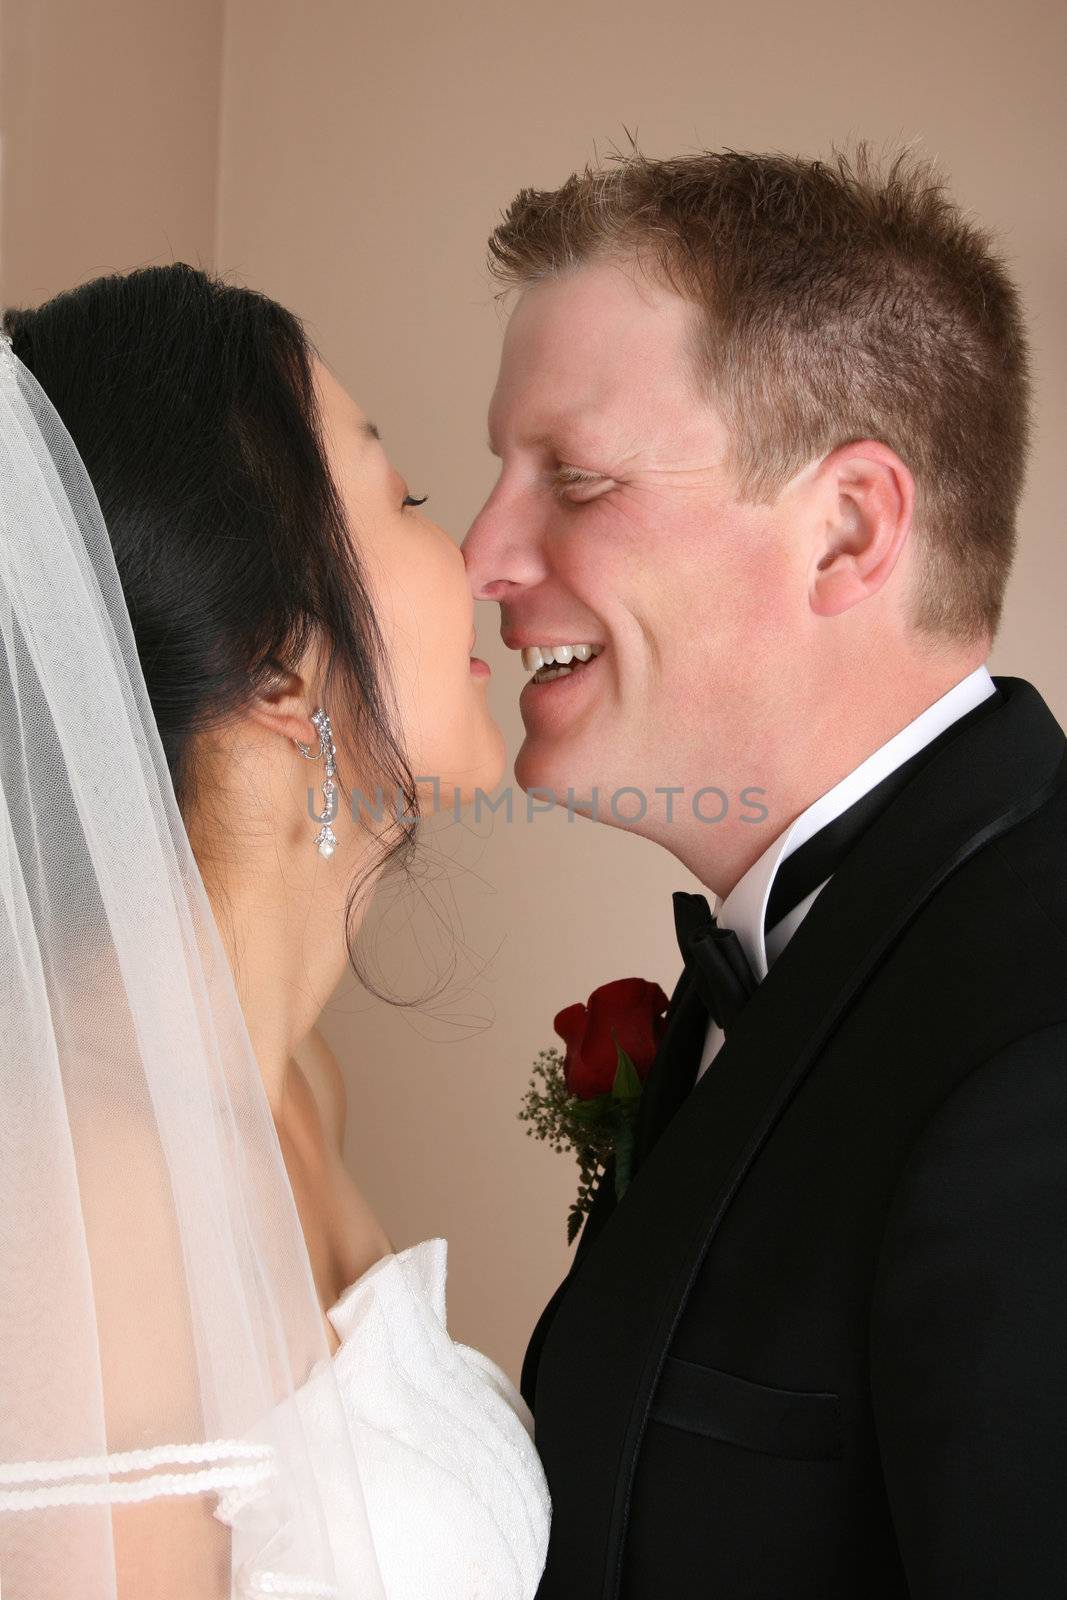 Bridal couple with their faces close together